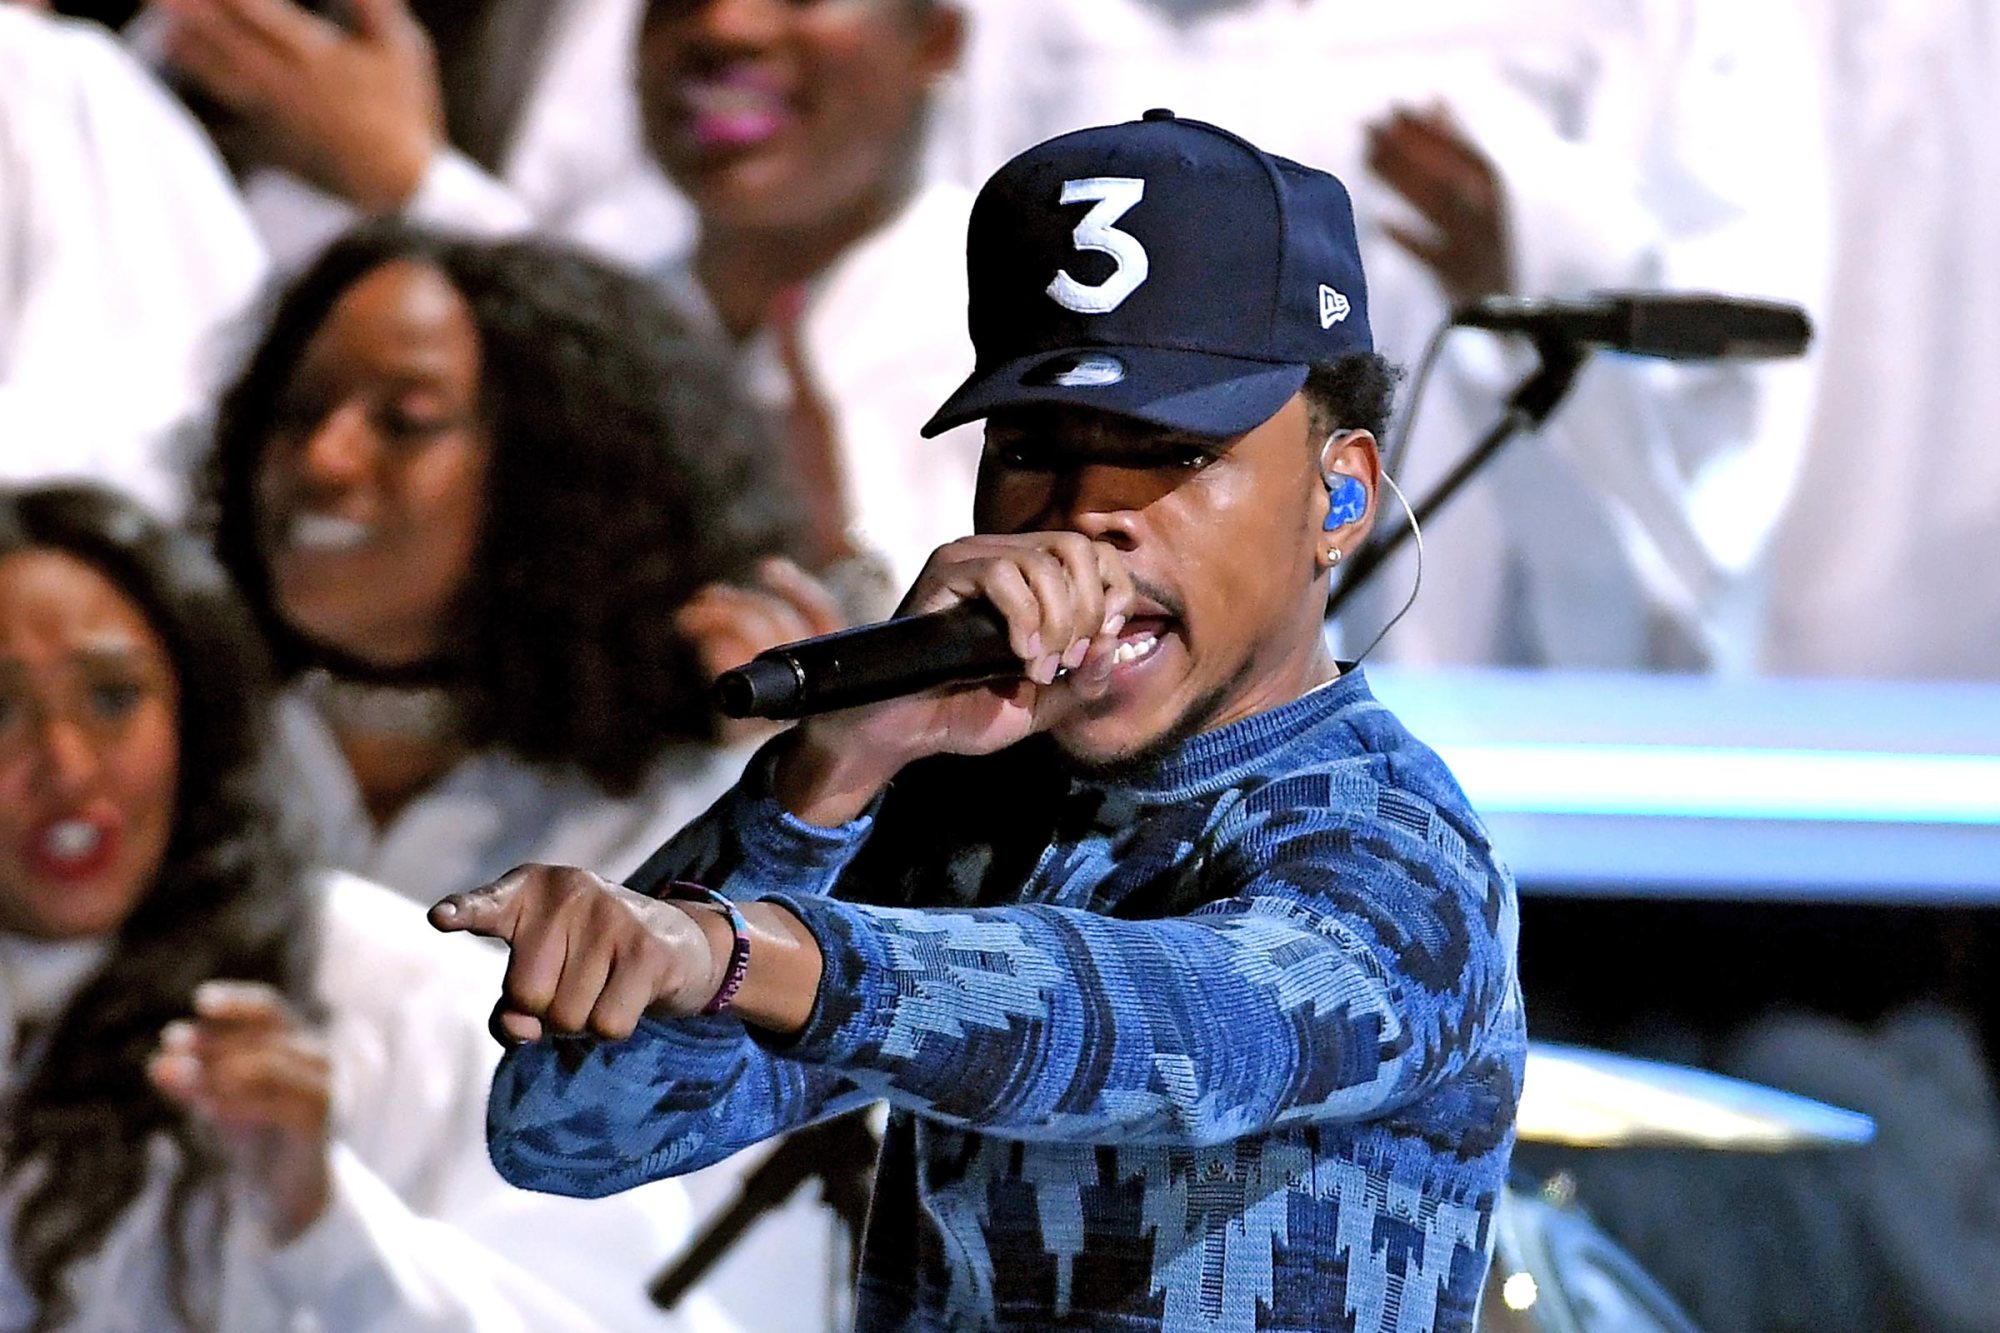 Chance The Rapper Brings Church to Last Night's Grammy Awards